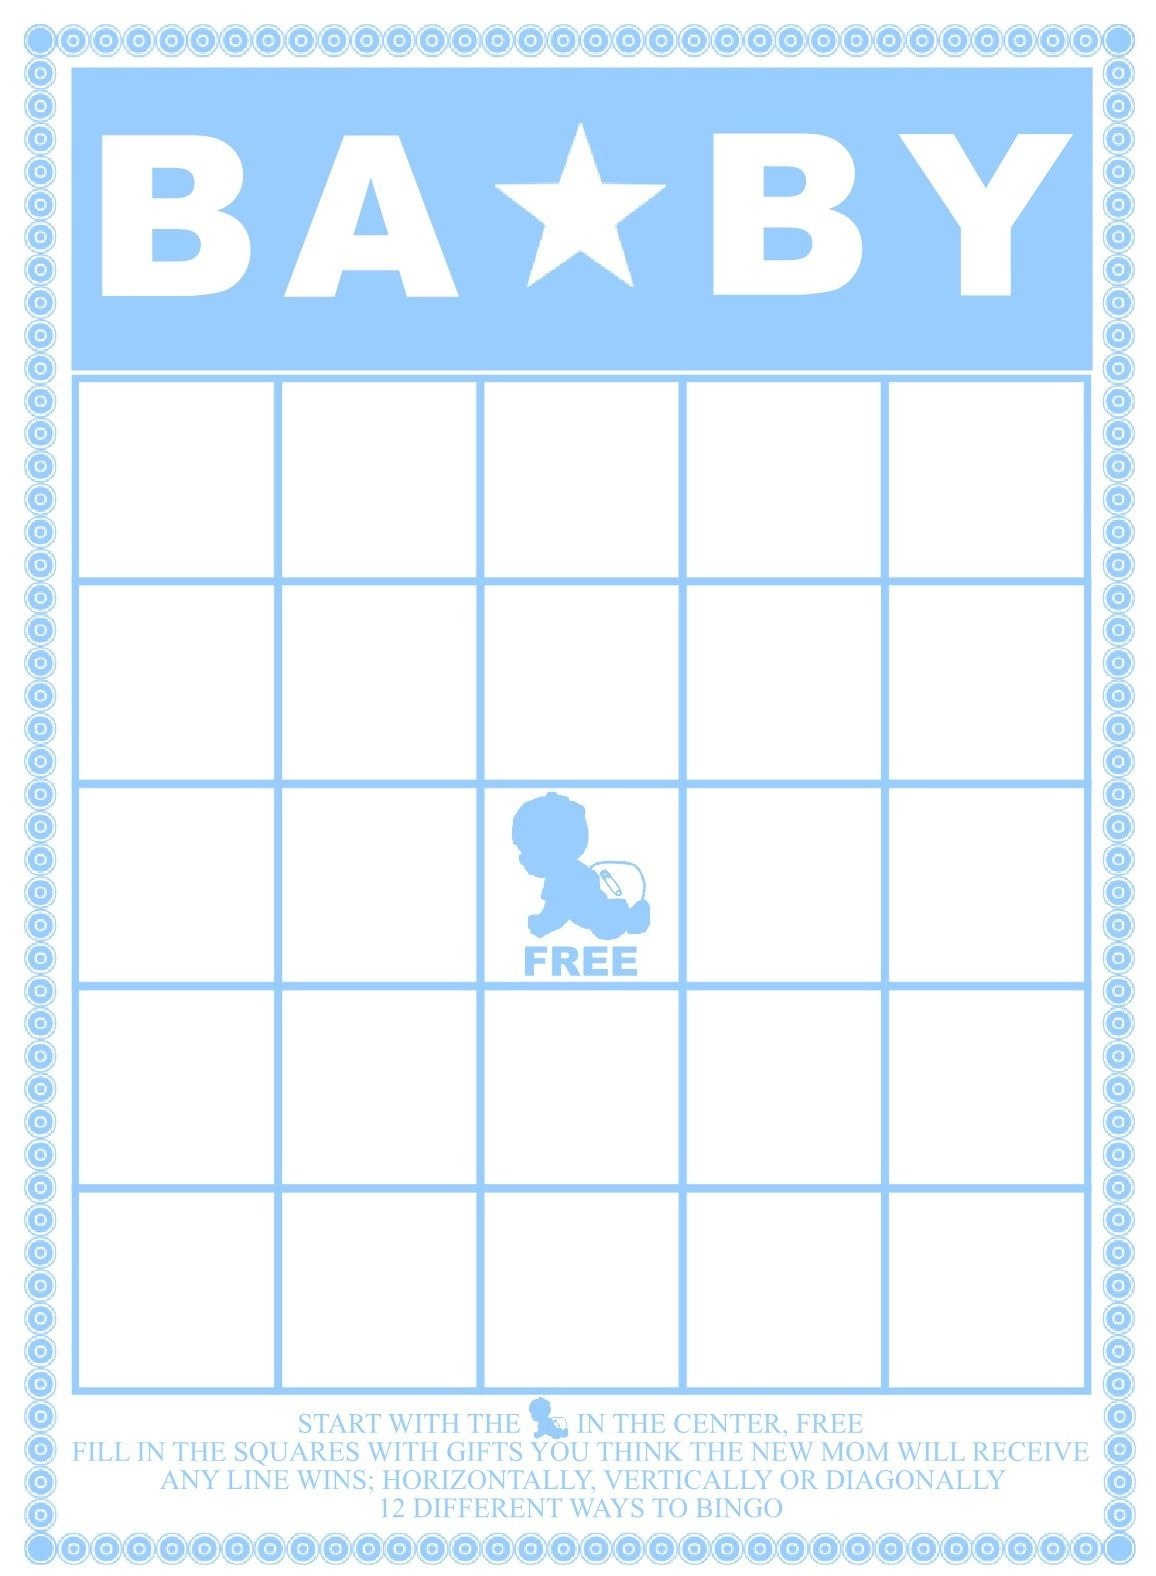 29 Sets Of Free Baby Shower Bingo Cards Pertaining To Baby Bingo - Free Printable Baby Shower Bingo Blank Cards